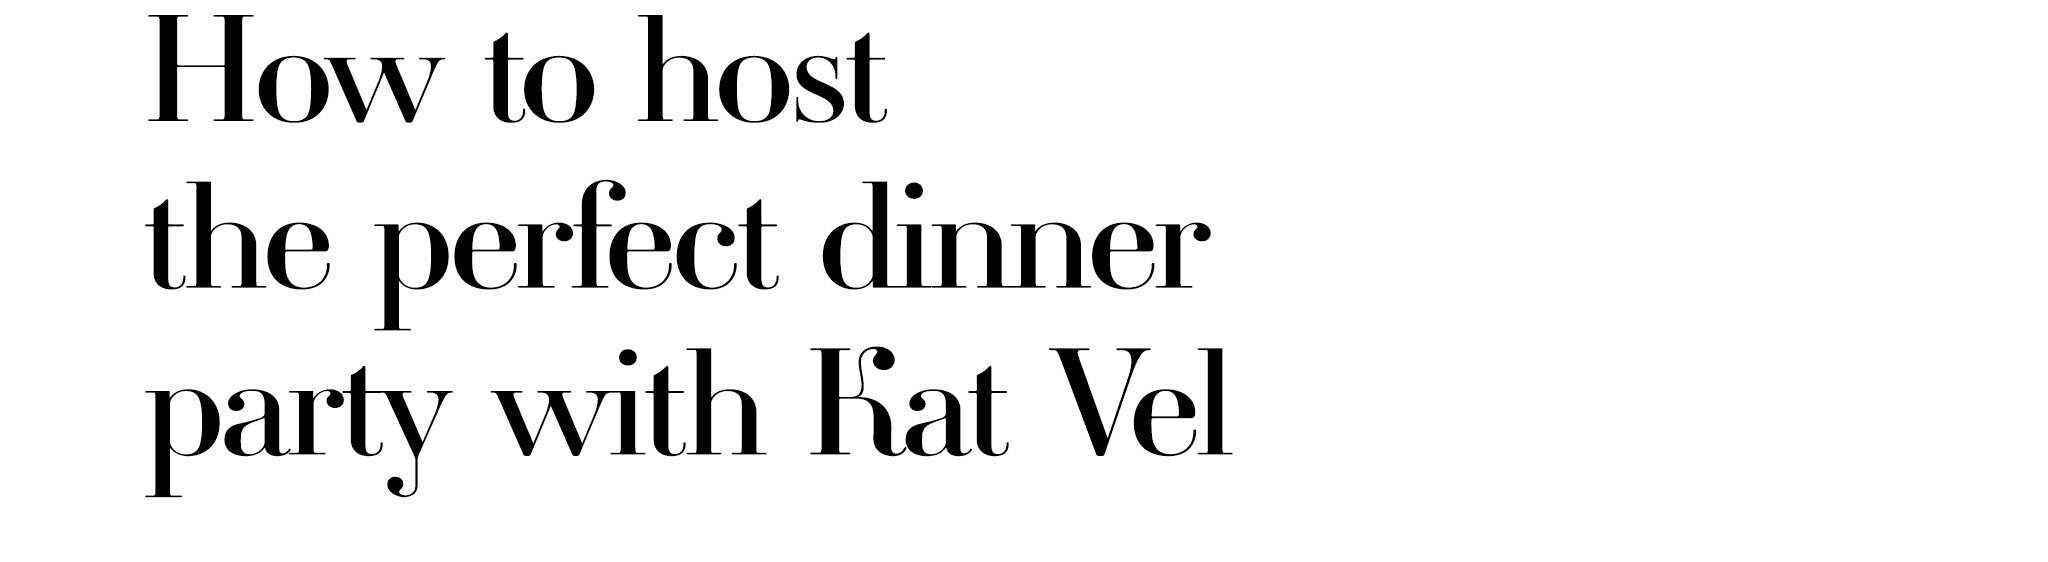 HOW TO HOST THE PERFECT DINNER PARTY WITH KAT VEL